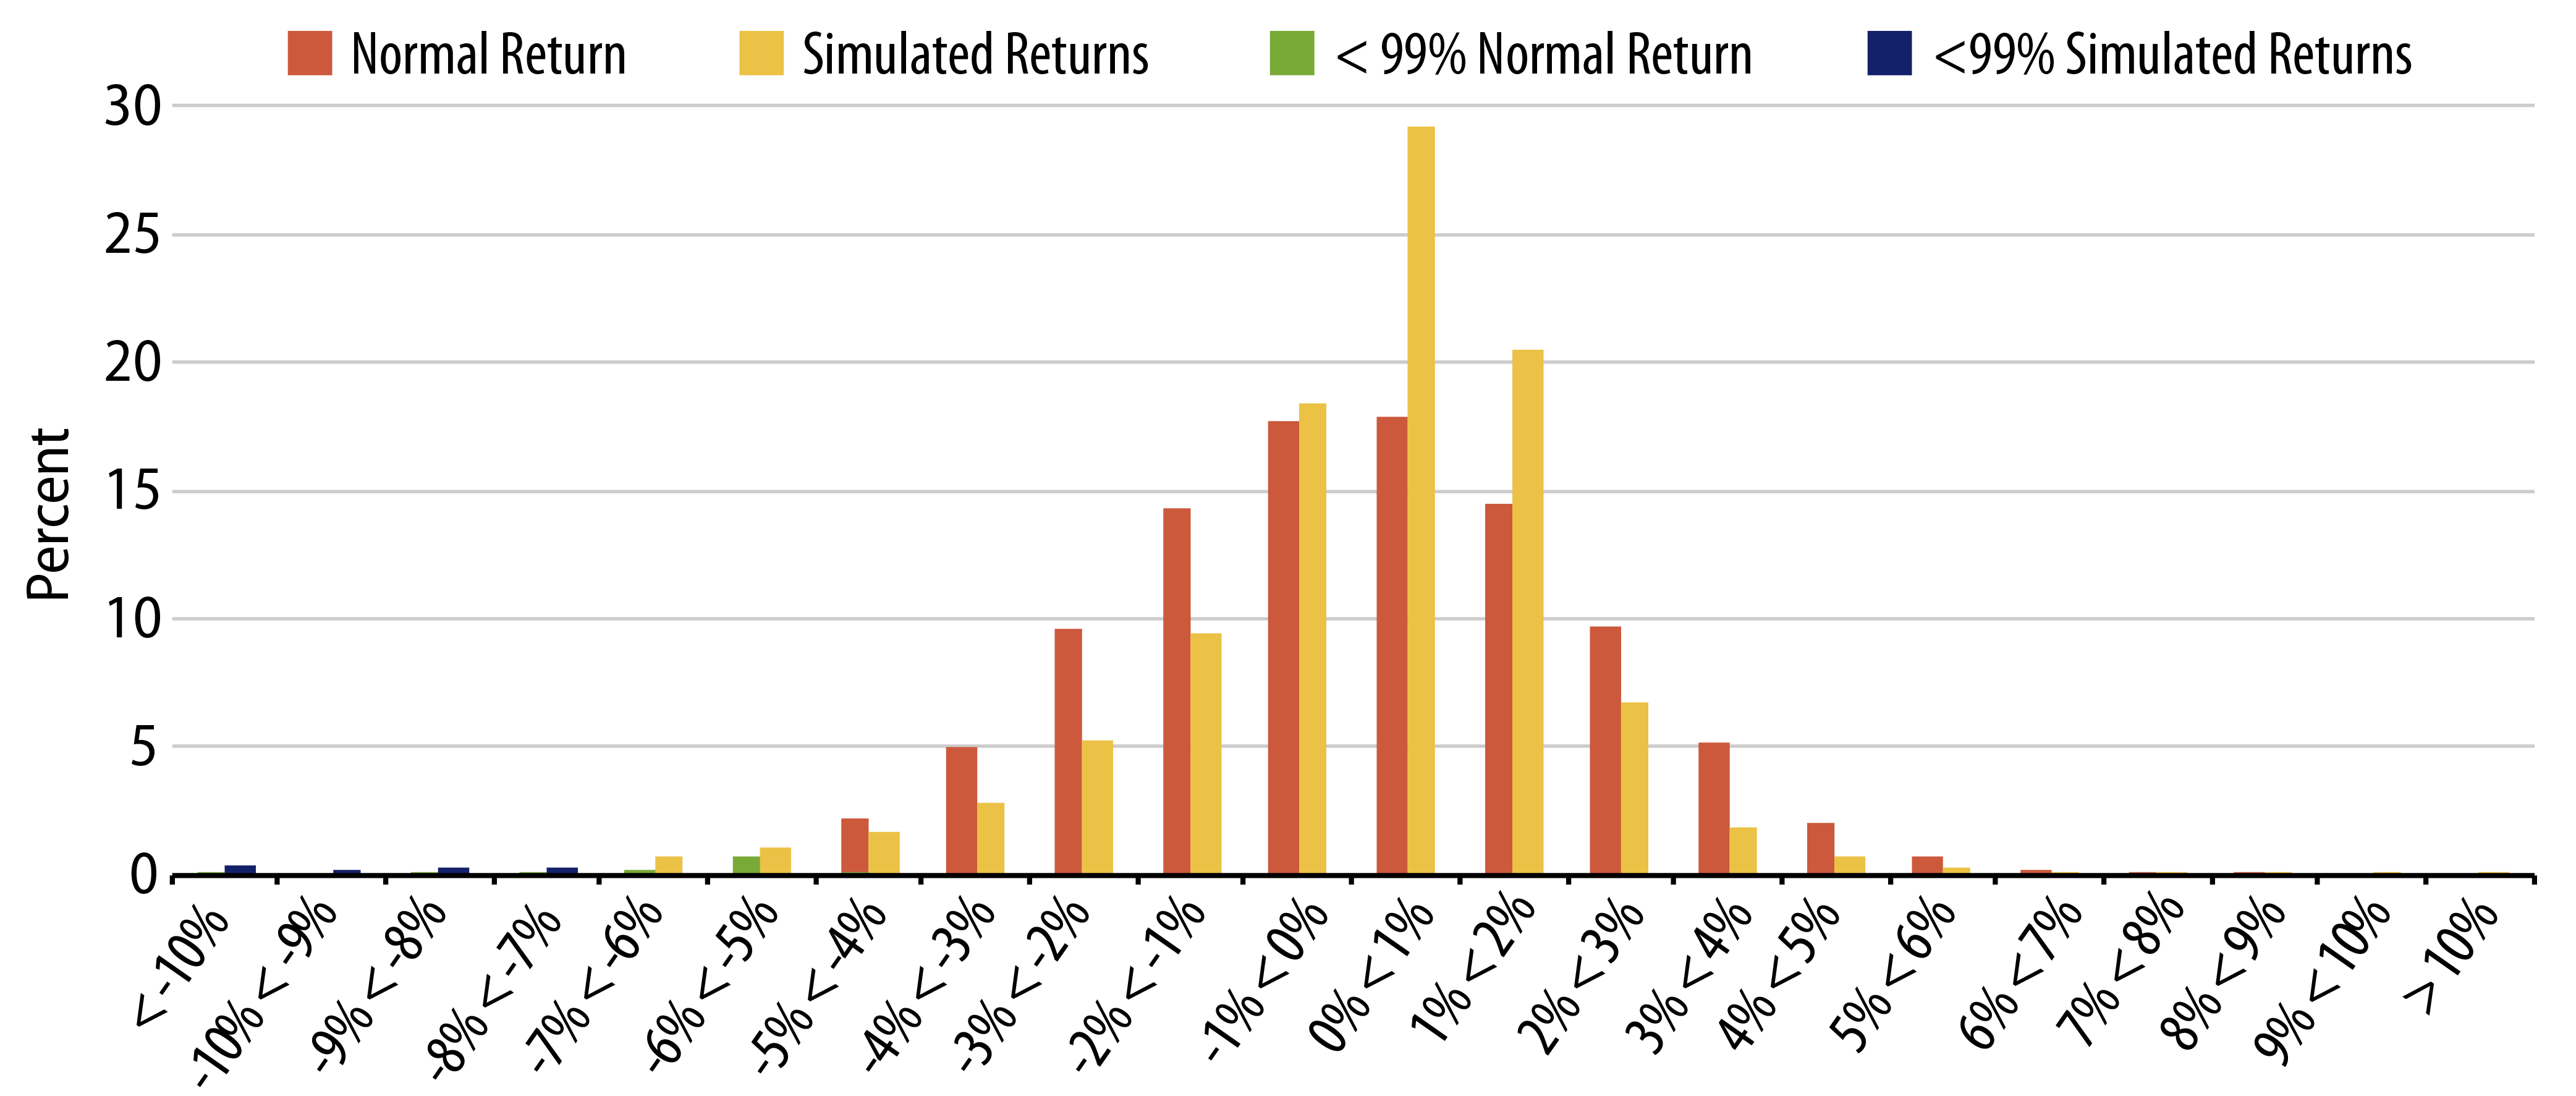 Explore VaR From Simulated Returns vs. Simple (Normal) Model